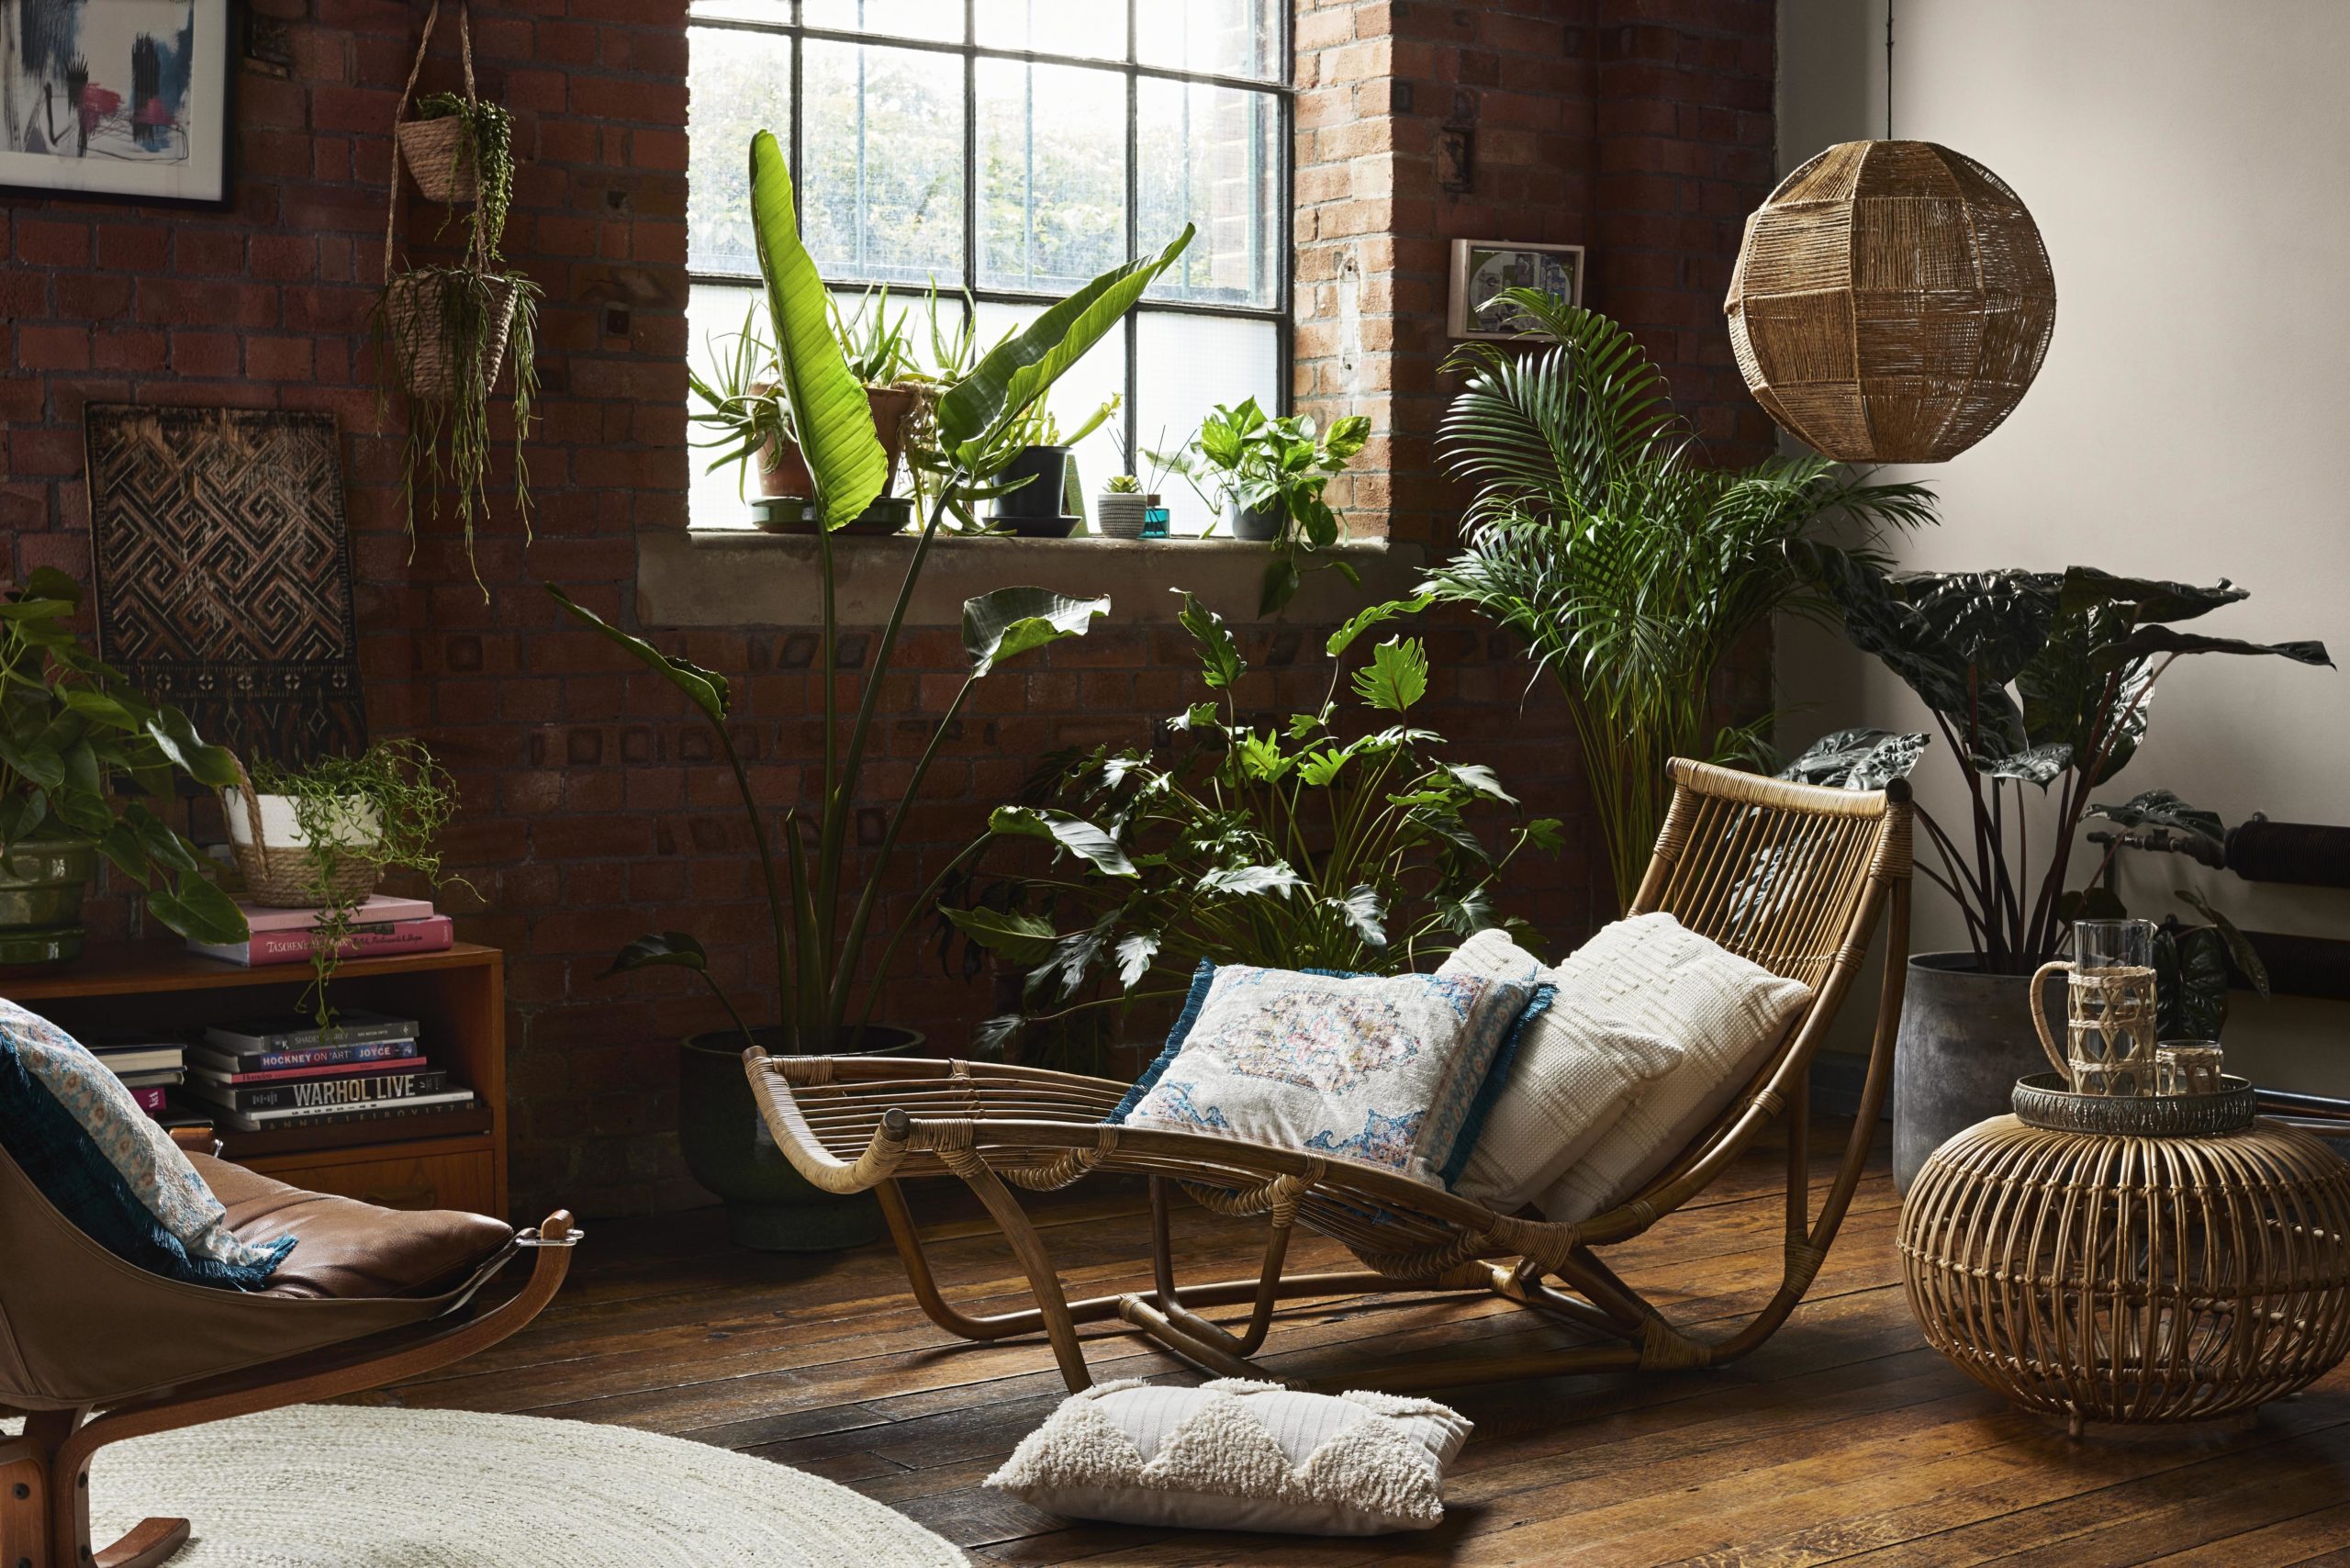 Home Trend: Down To Earth